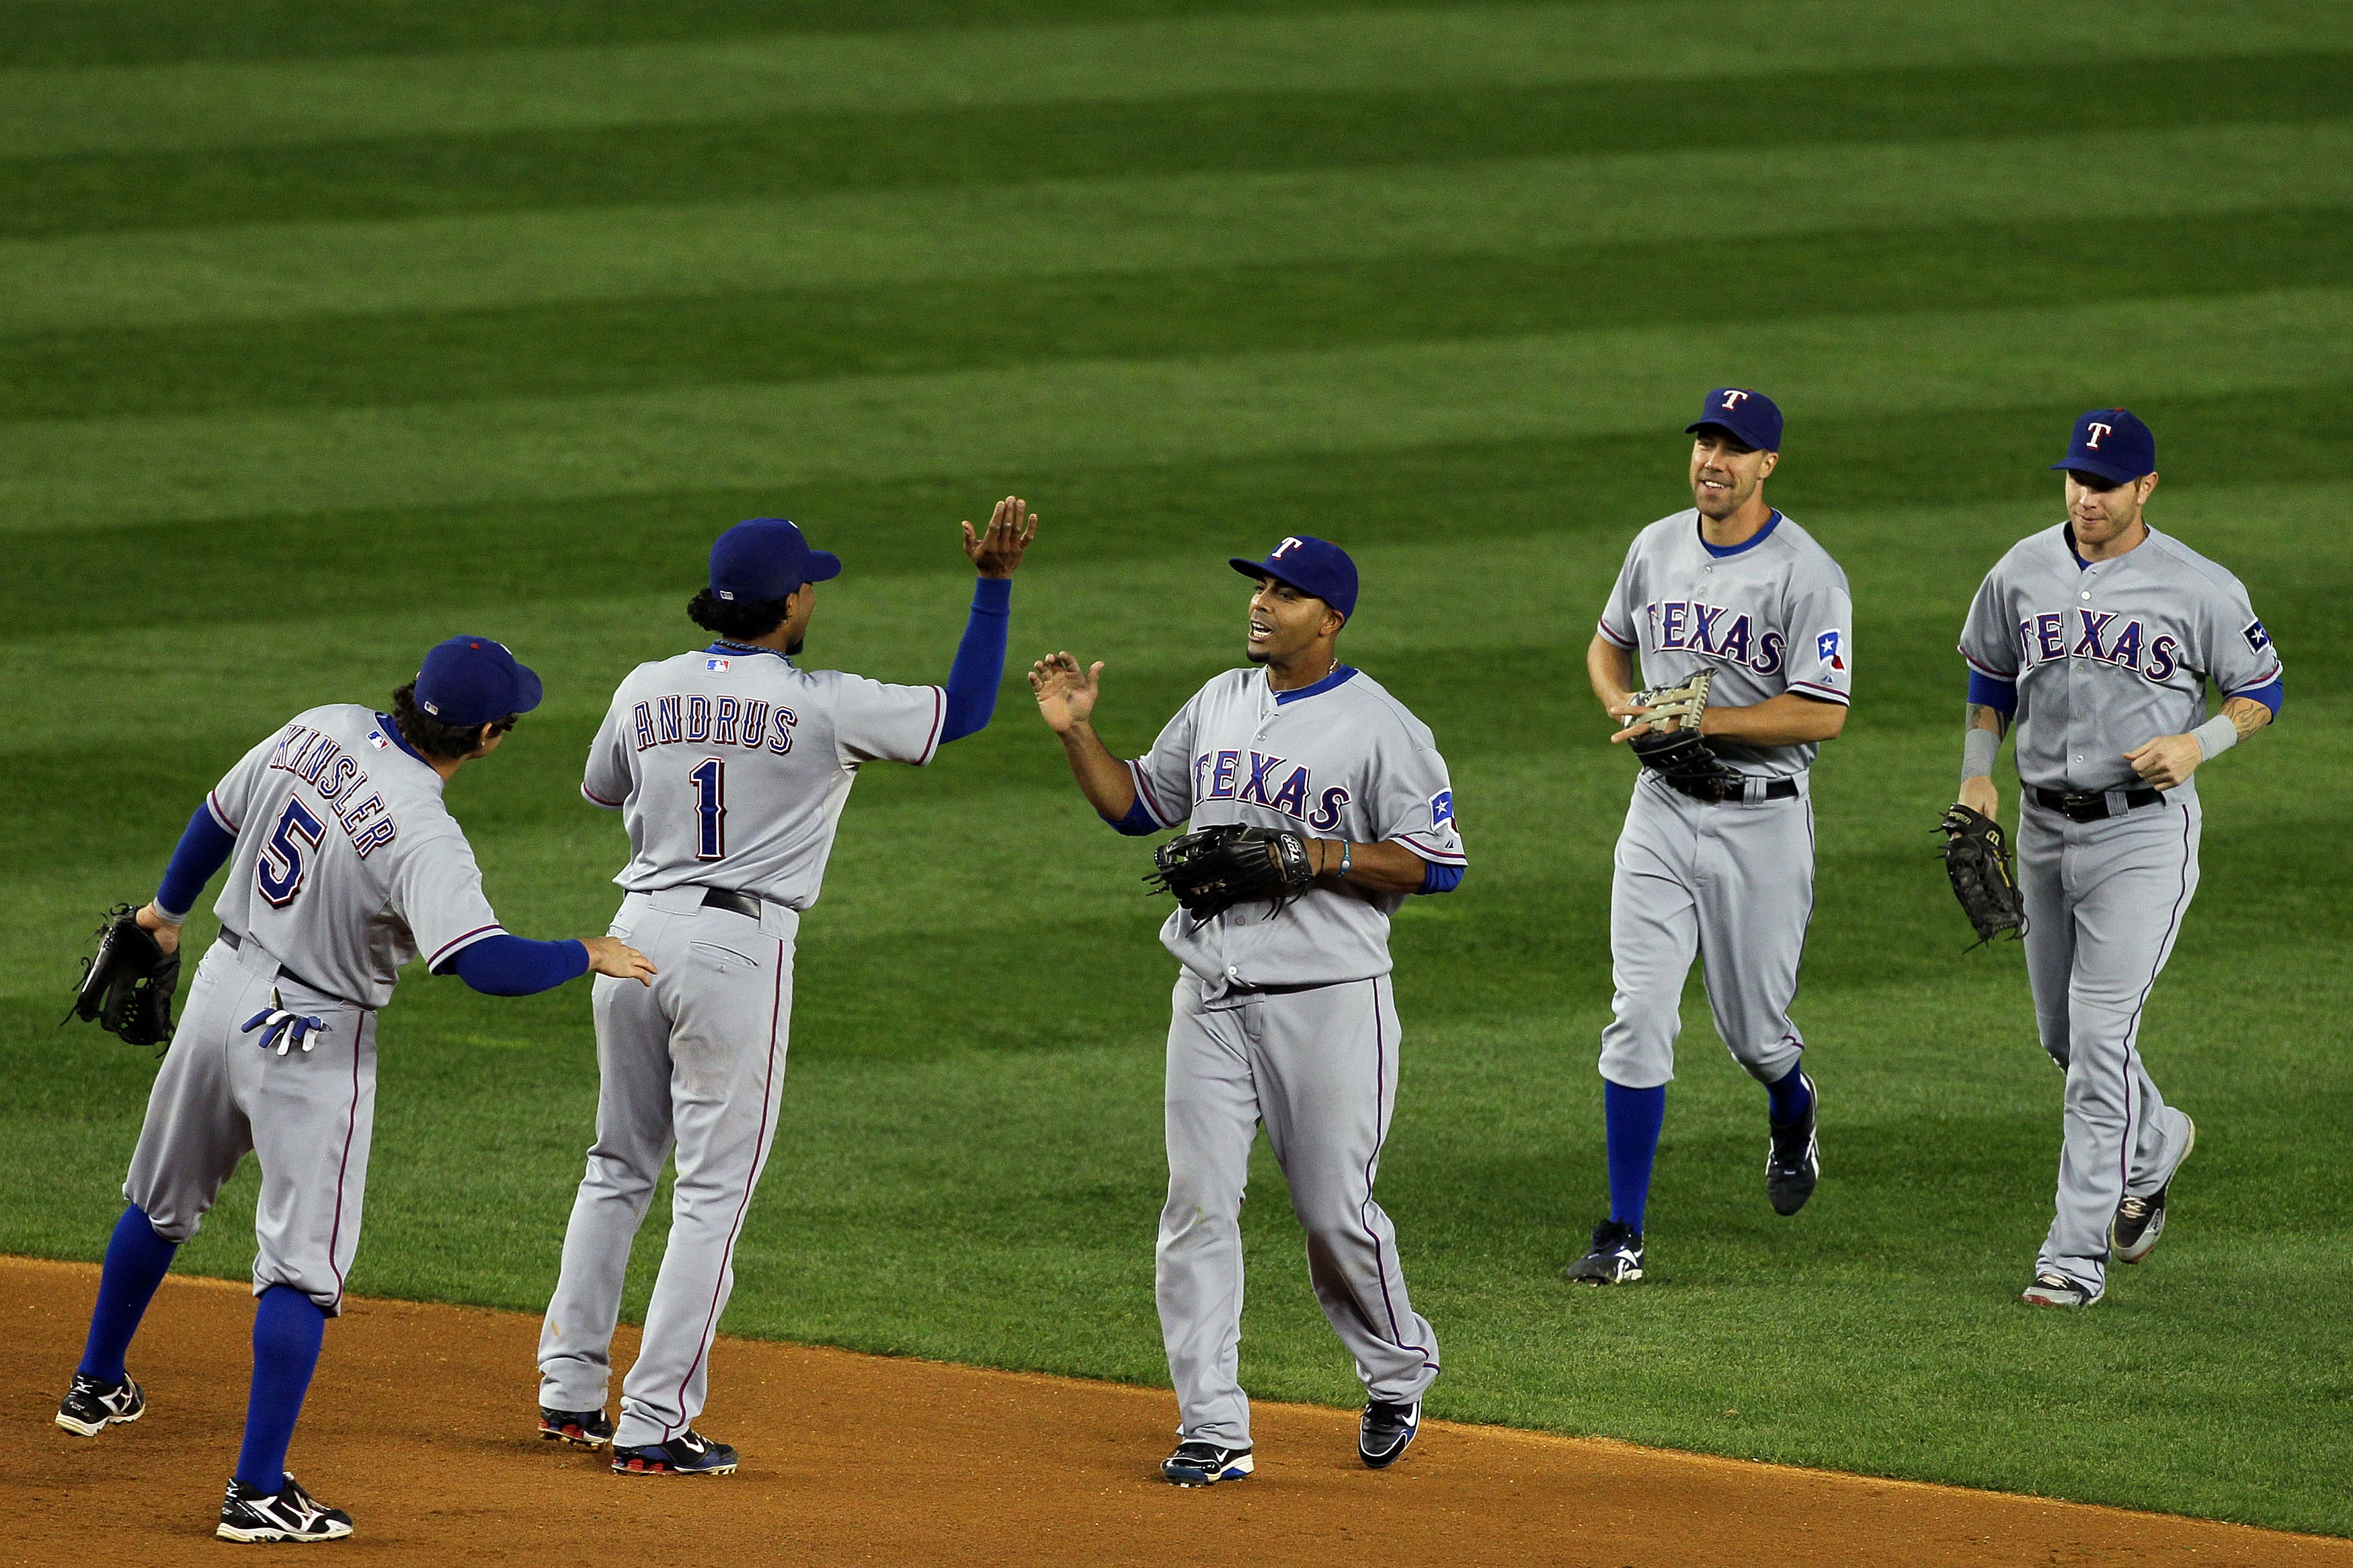 NEW YORK - OCTOBER 18:  (L-R) Ian Kinsler #5, Elvis Andrus #1, Nelson Cruz #17, David Murphy #7 and Josh Hamilton #32 of the Texas Rangers celebrate after the Rangers won 8-0 against the New York Yankees in Game Three of the ALCS during the 2010 MLB Playo